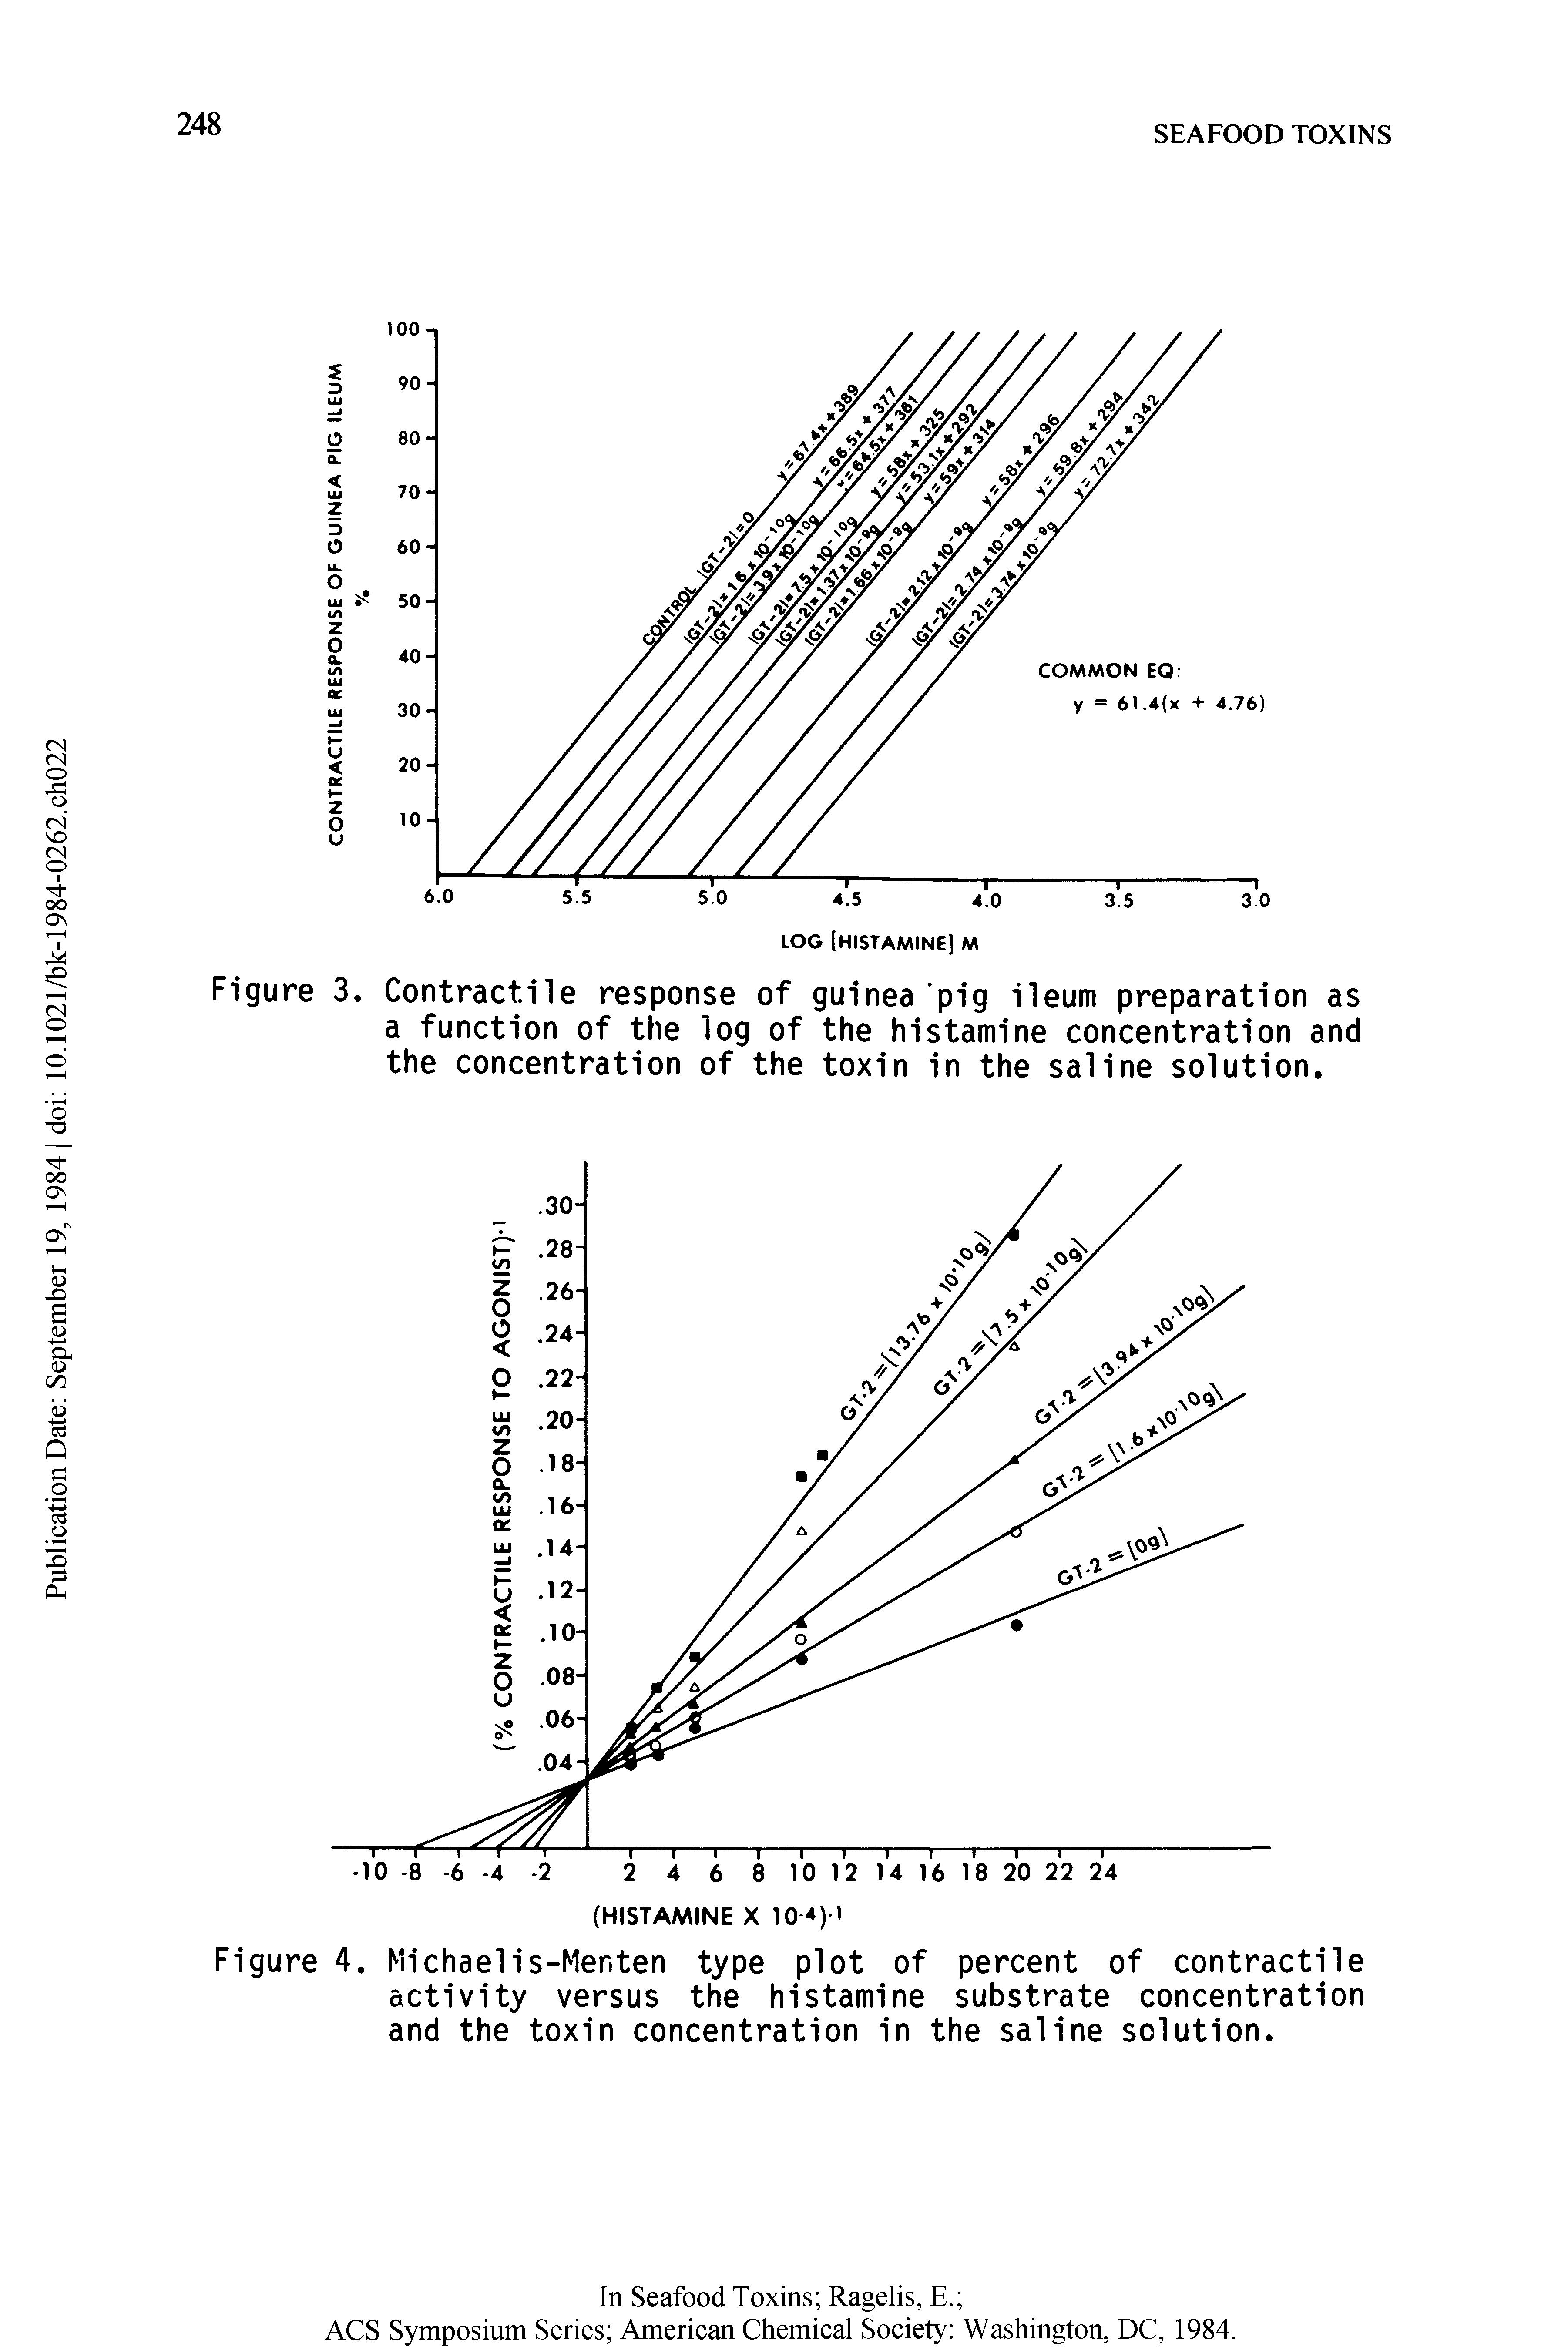 Figure 4. Michaelis-Menten type plot of percent of contractile activity versus the histamine substrate concentration and the toxin concentration in the saline solution.